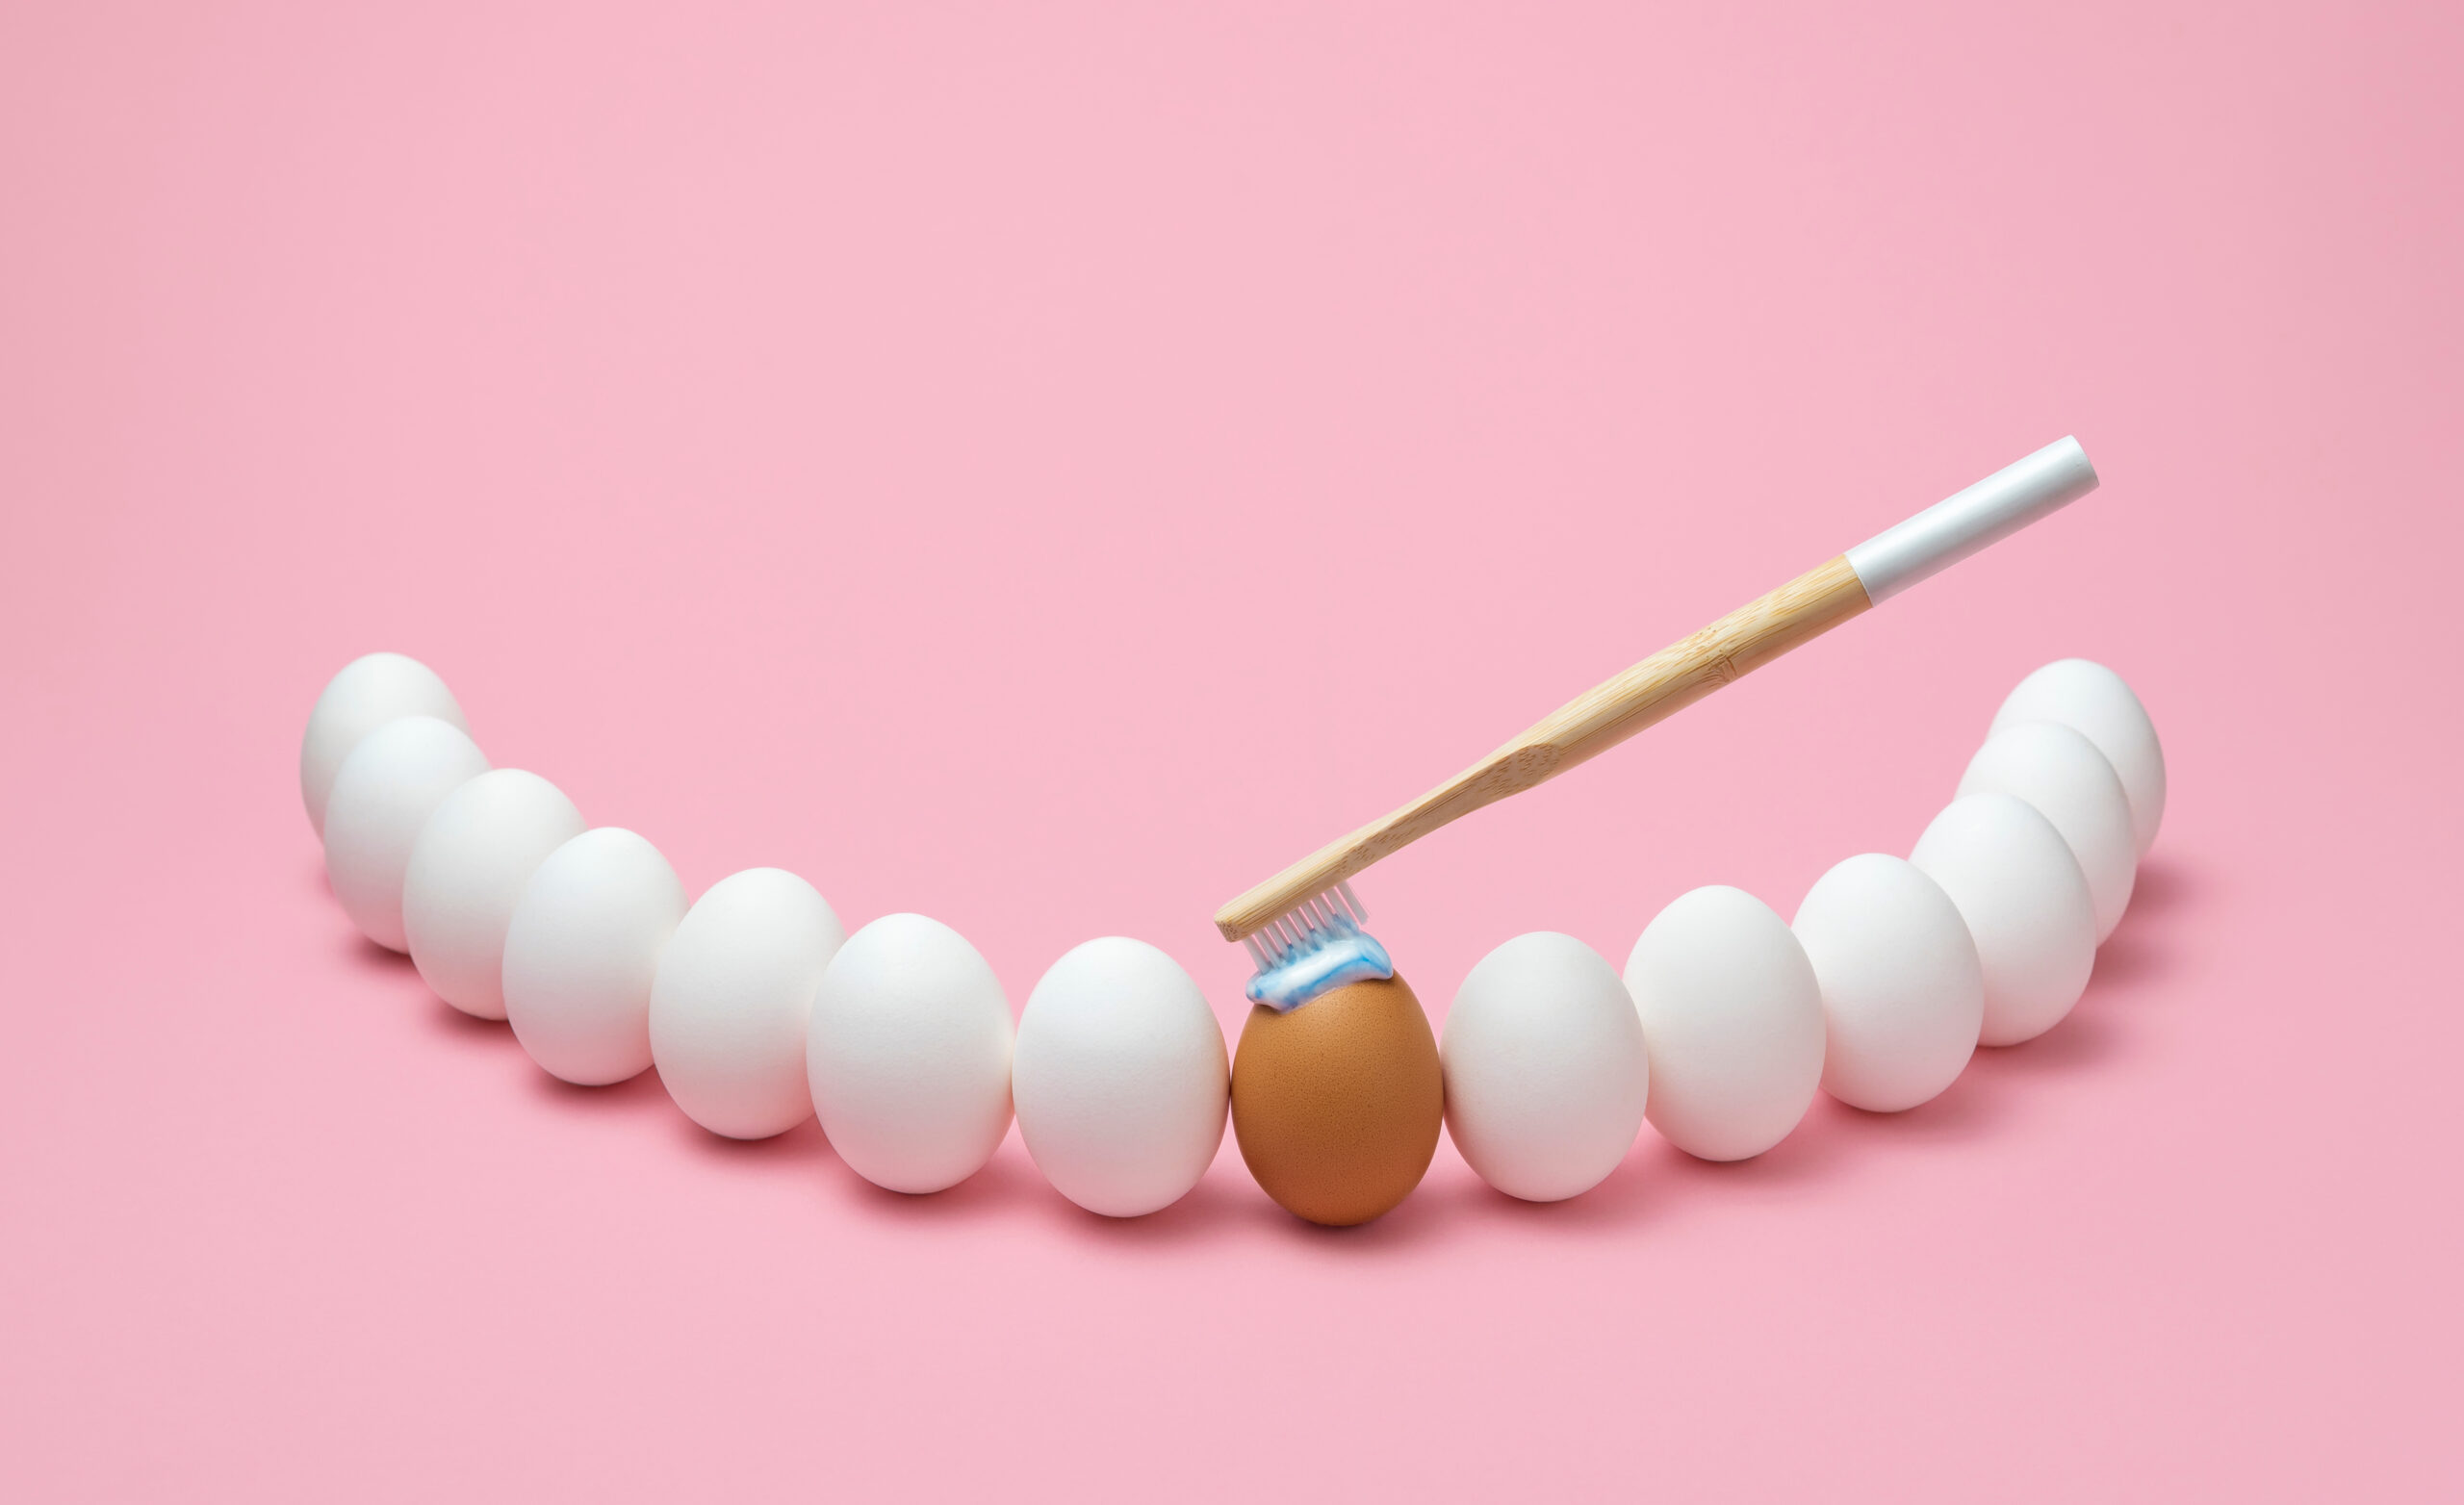 a toothbrush brush the egg